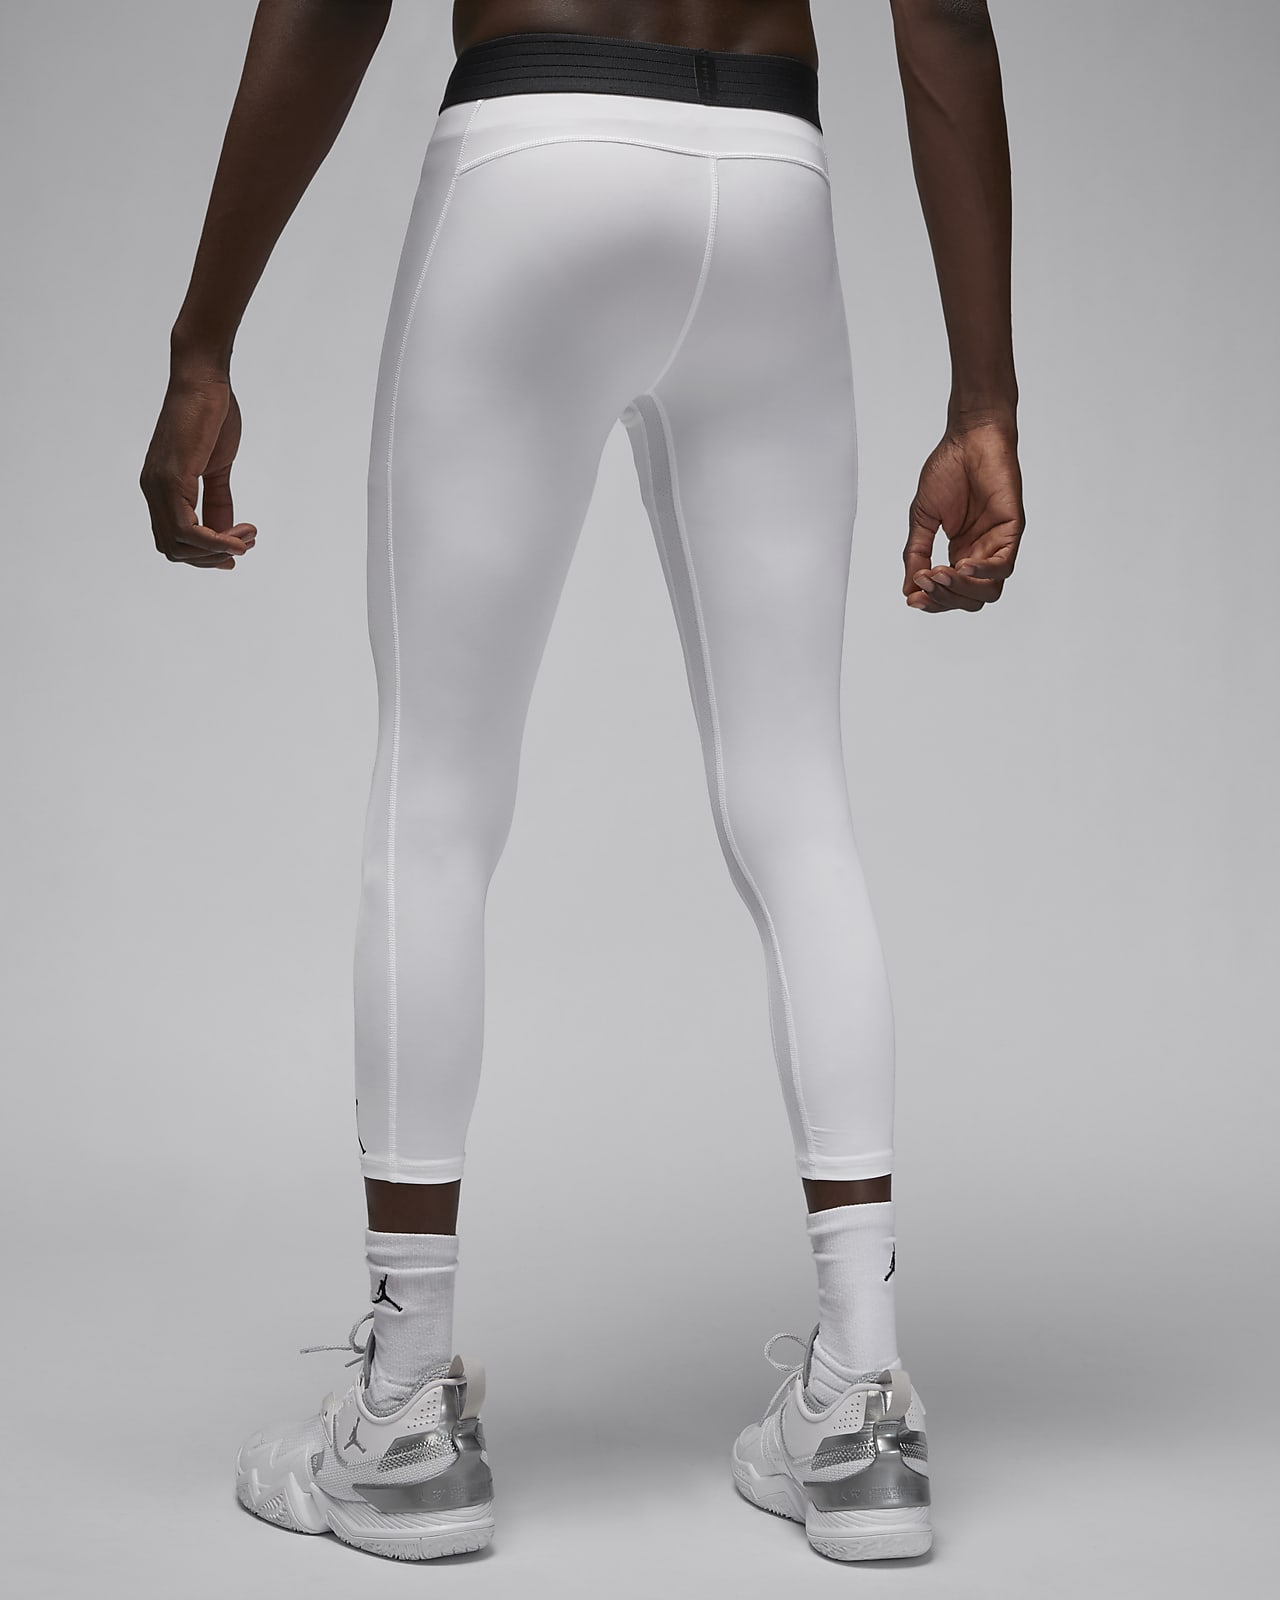 Nike Jordan Dominate Men's Tights  Sport outfits, Mens tights, Mens  workout clothes